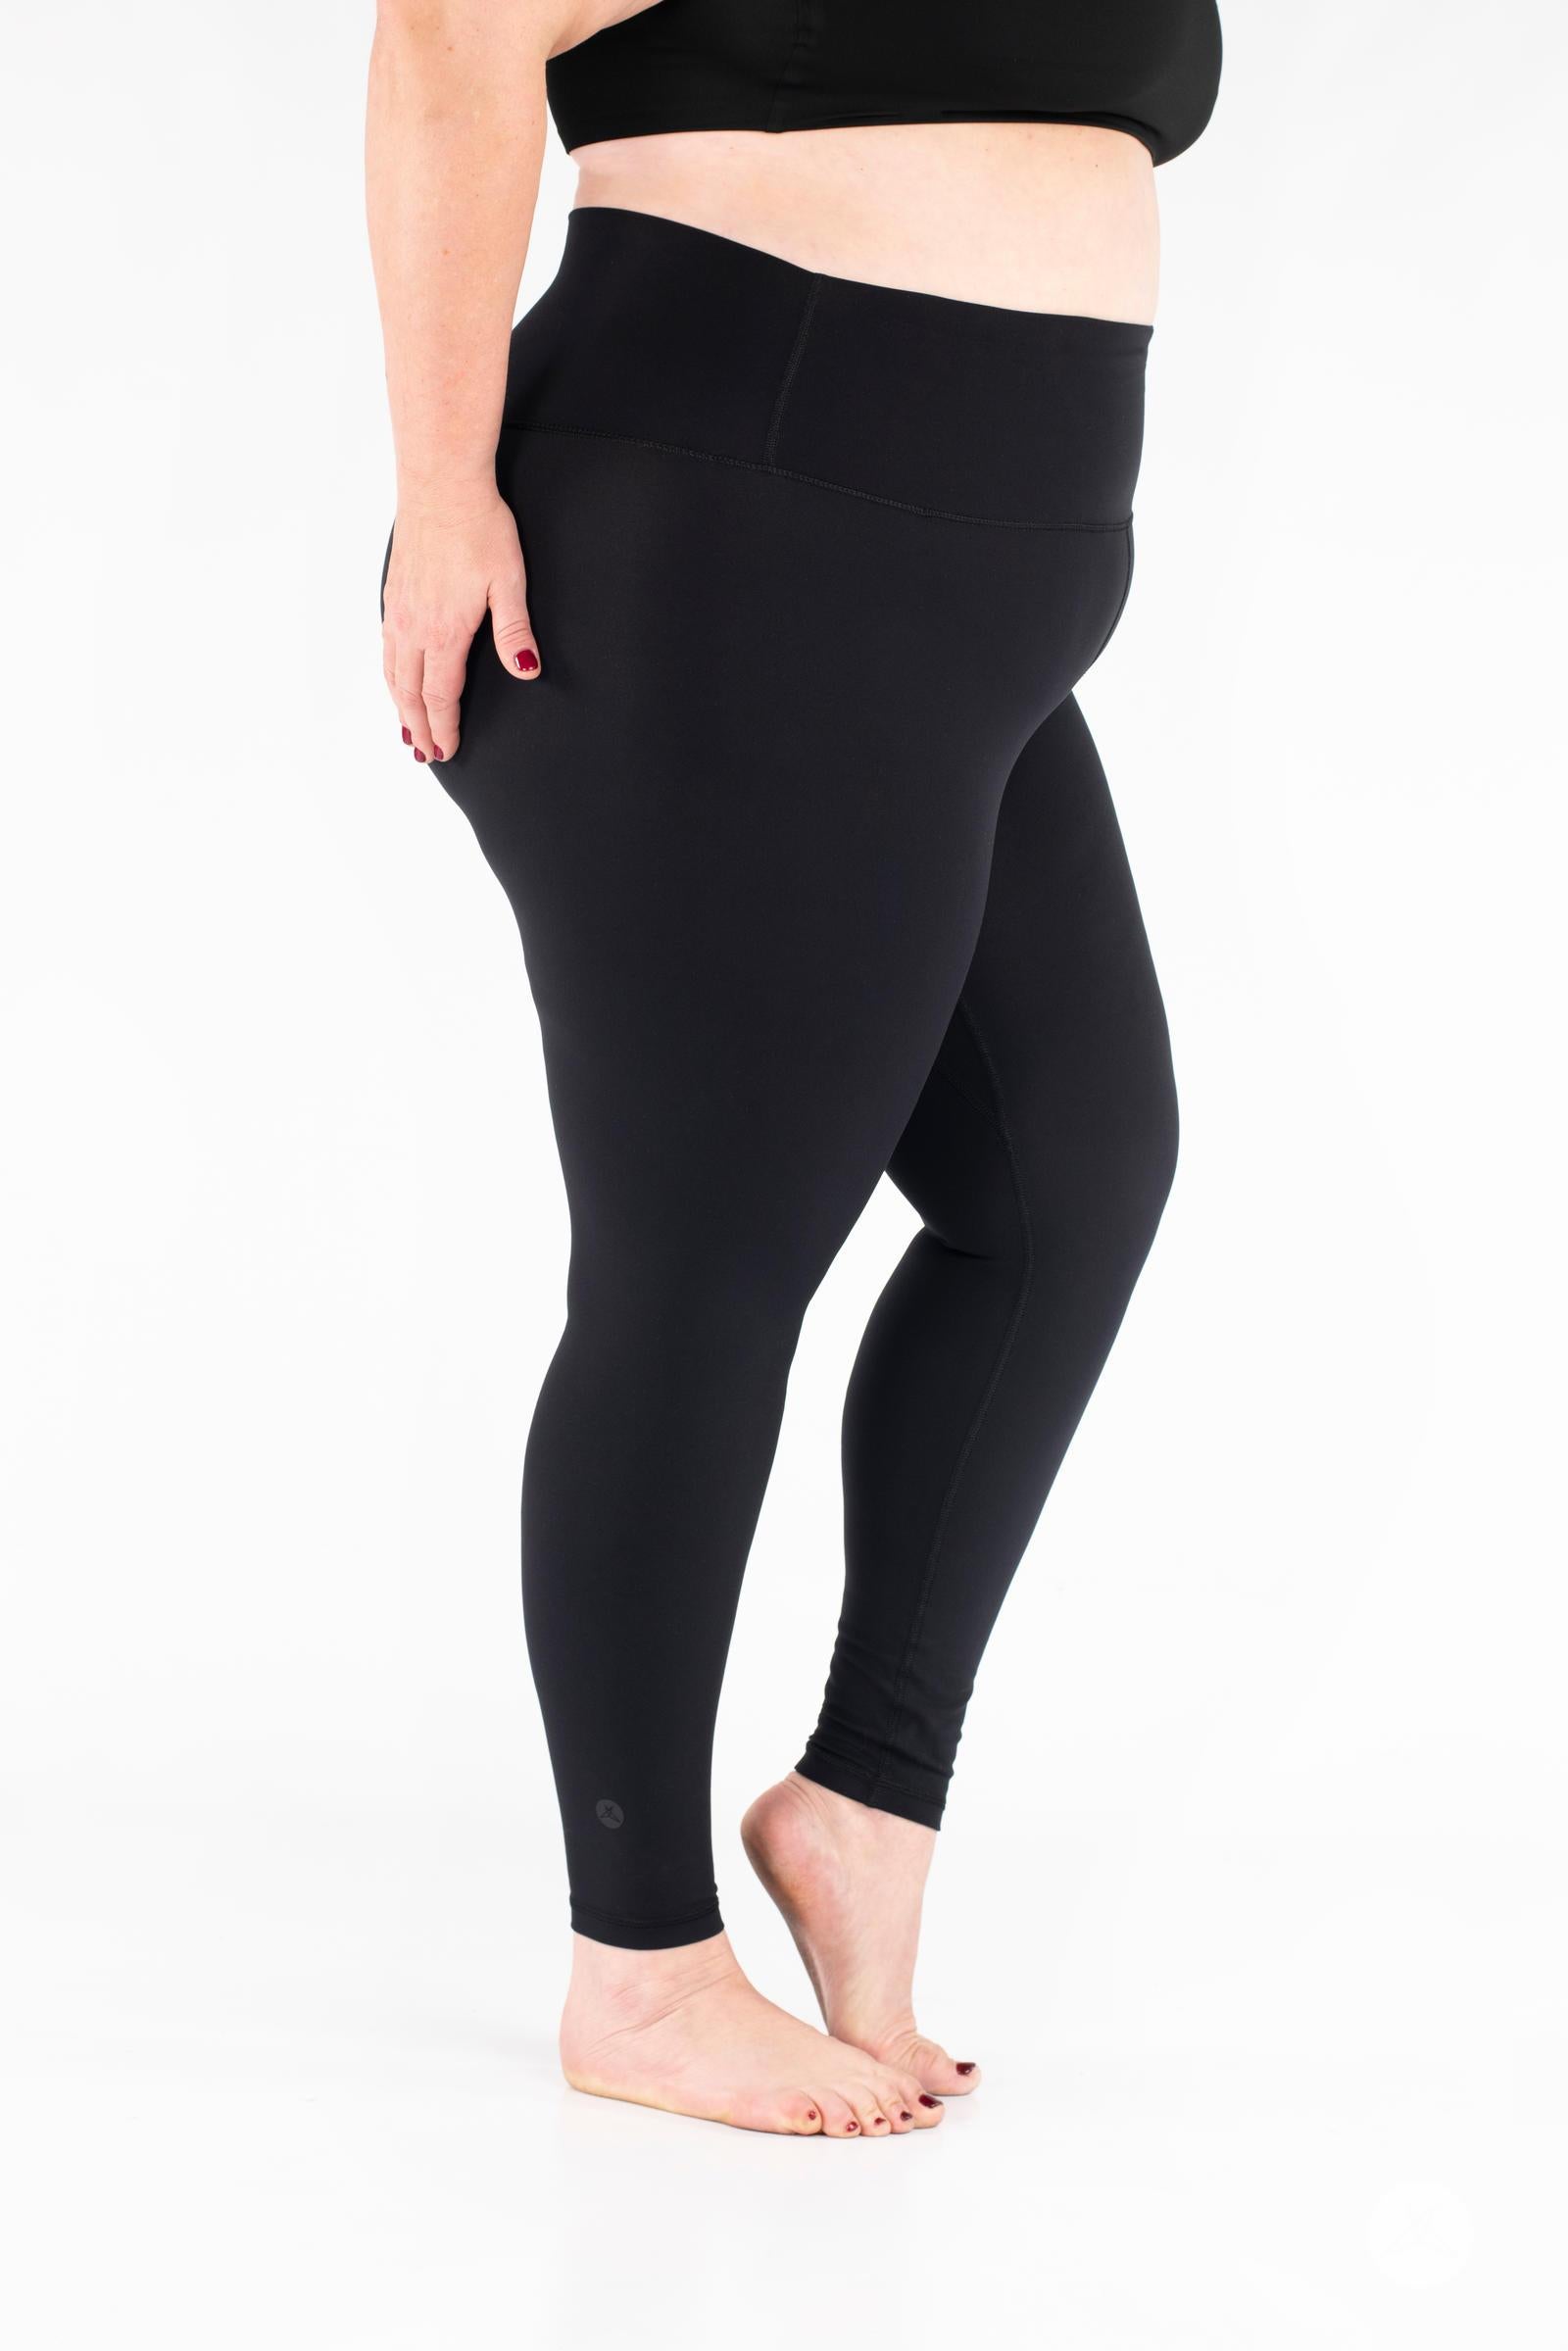 Promover Yoga Pants High Waist Leggings with Pockets 4 Way Stretch